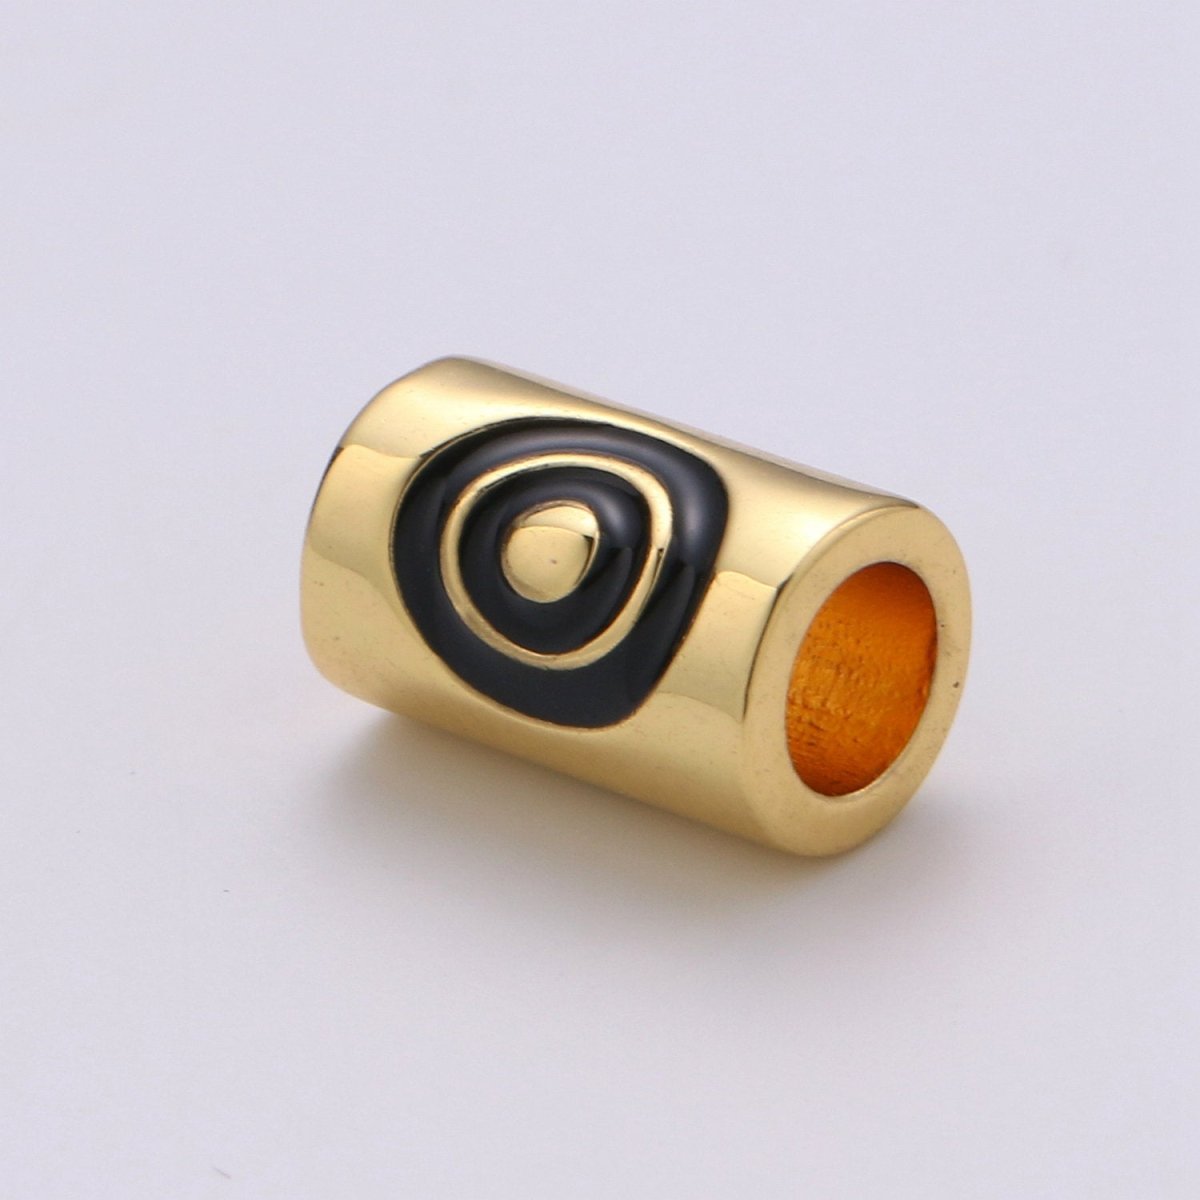 5x10mm Bead CZ Gold Beads Evil eye Beads cylinder Beads Charm for Bracelet Necklace Supply 4mm hole B-306 - DLUXCA